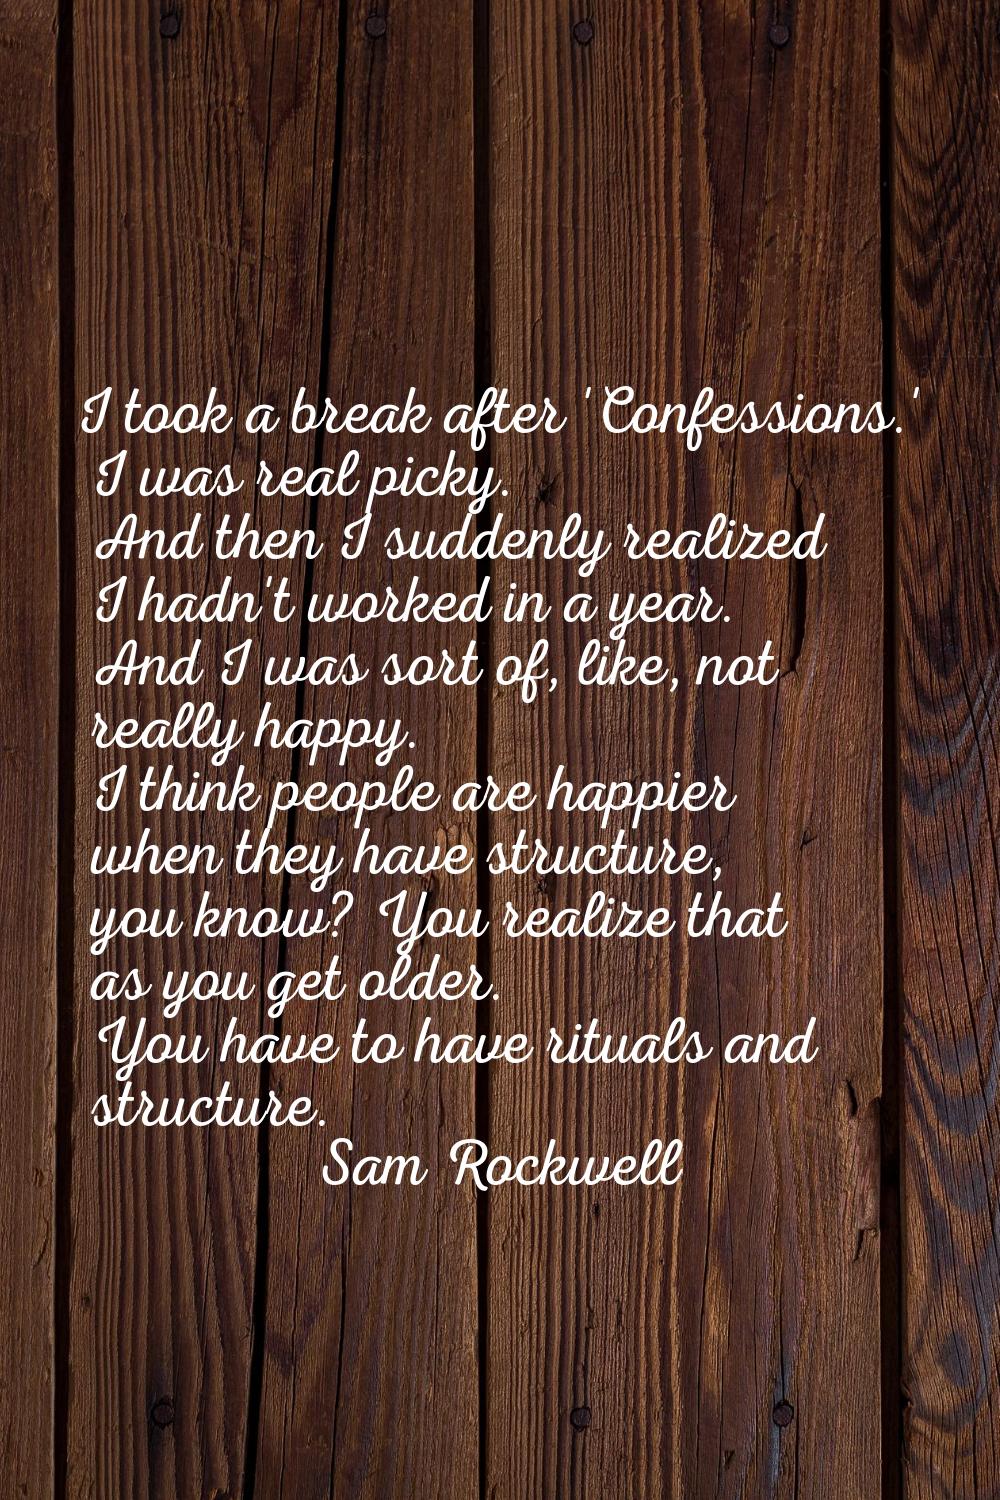 I took a break after 'Confessions.' I was real picky. And then I suddenly realized I hadn't worked 